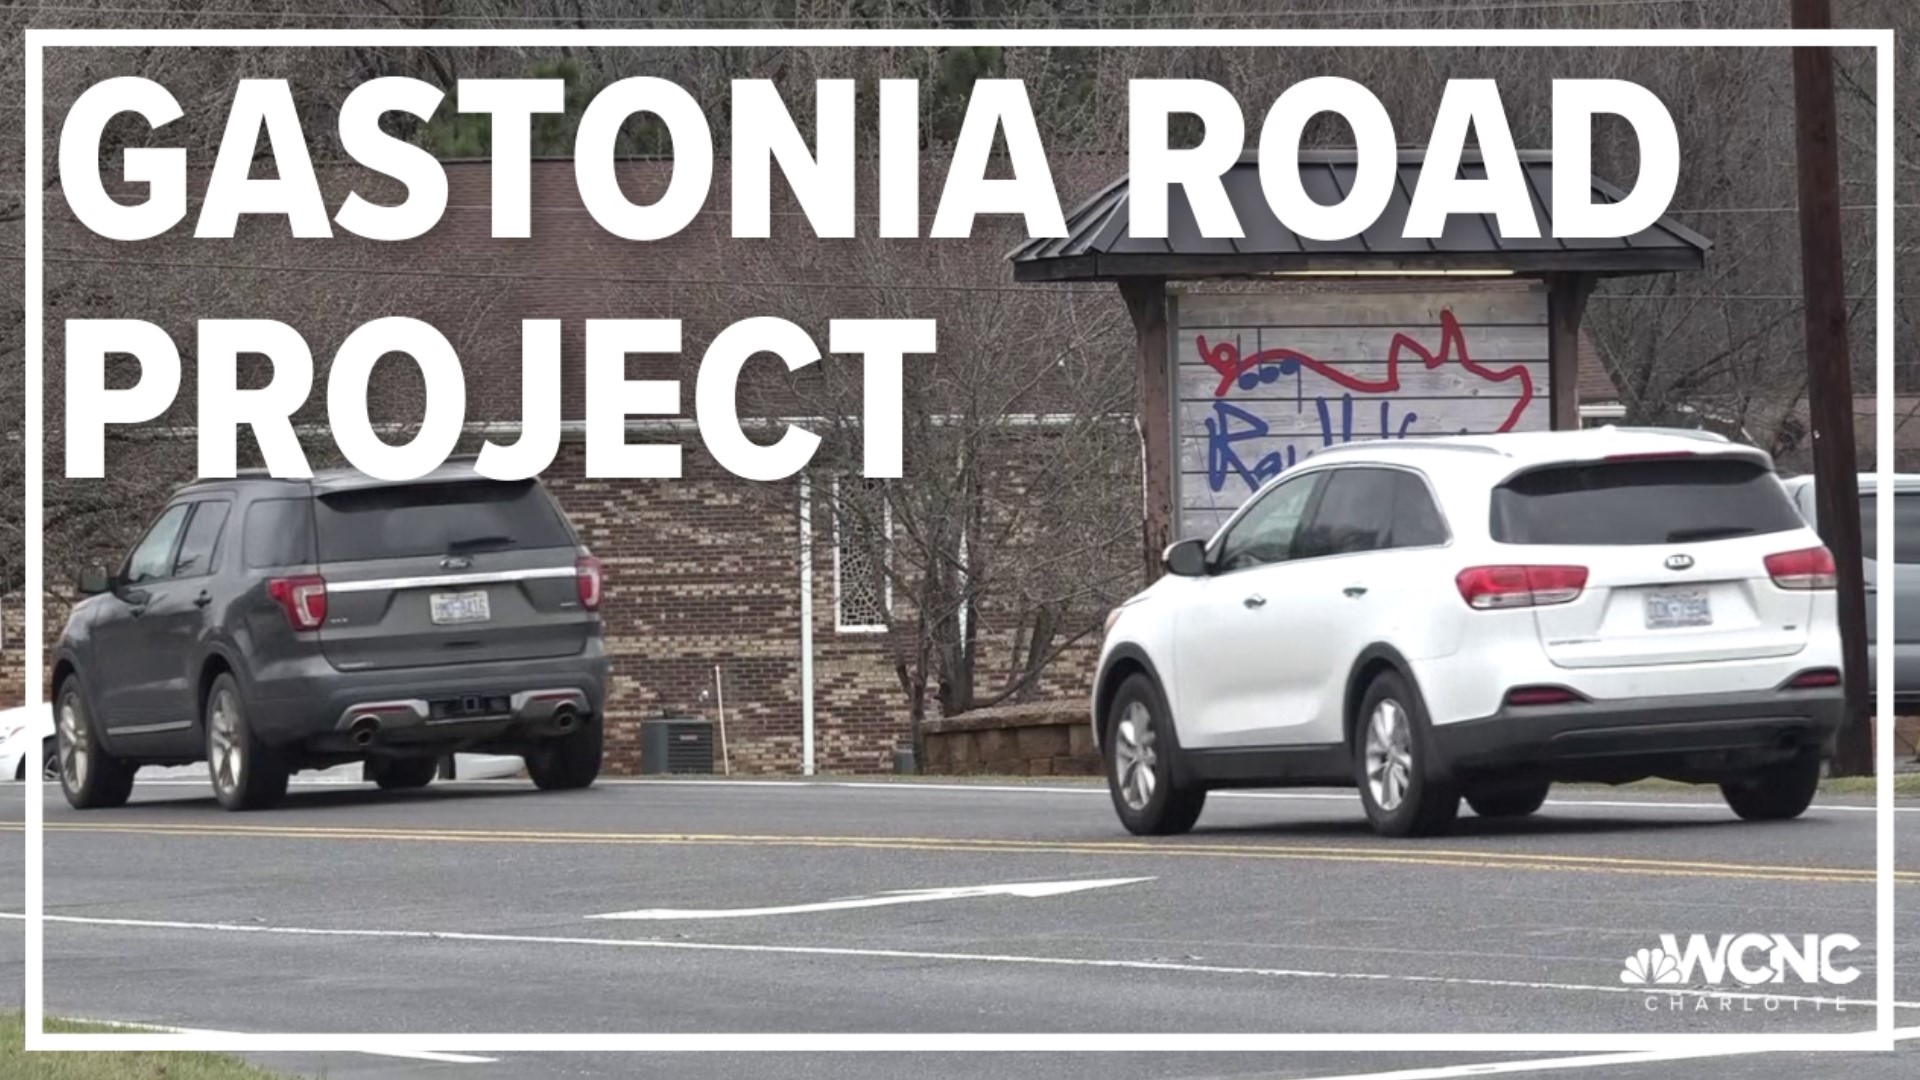 A new road improvement project is causing a stir in one Gastonia neighborhood.